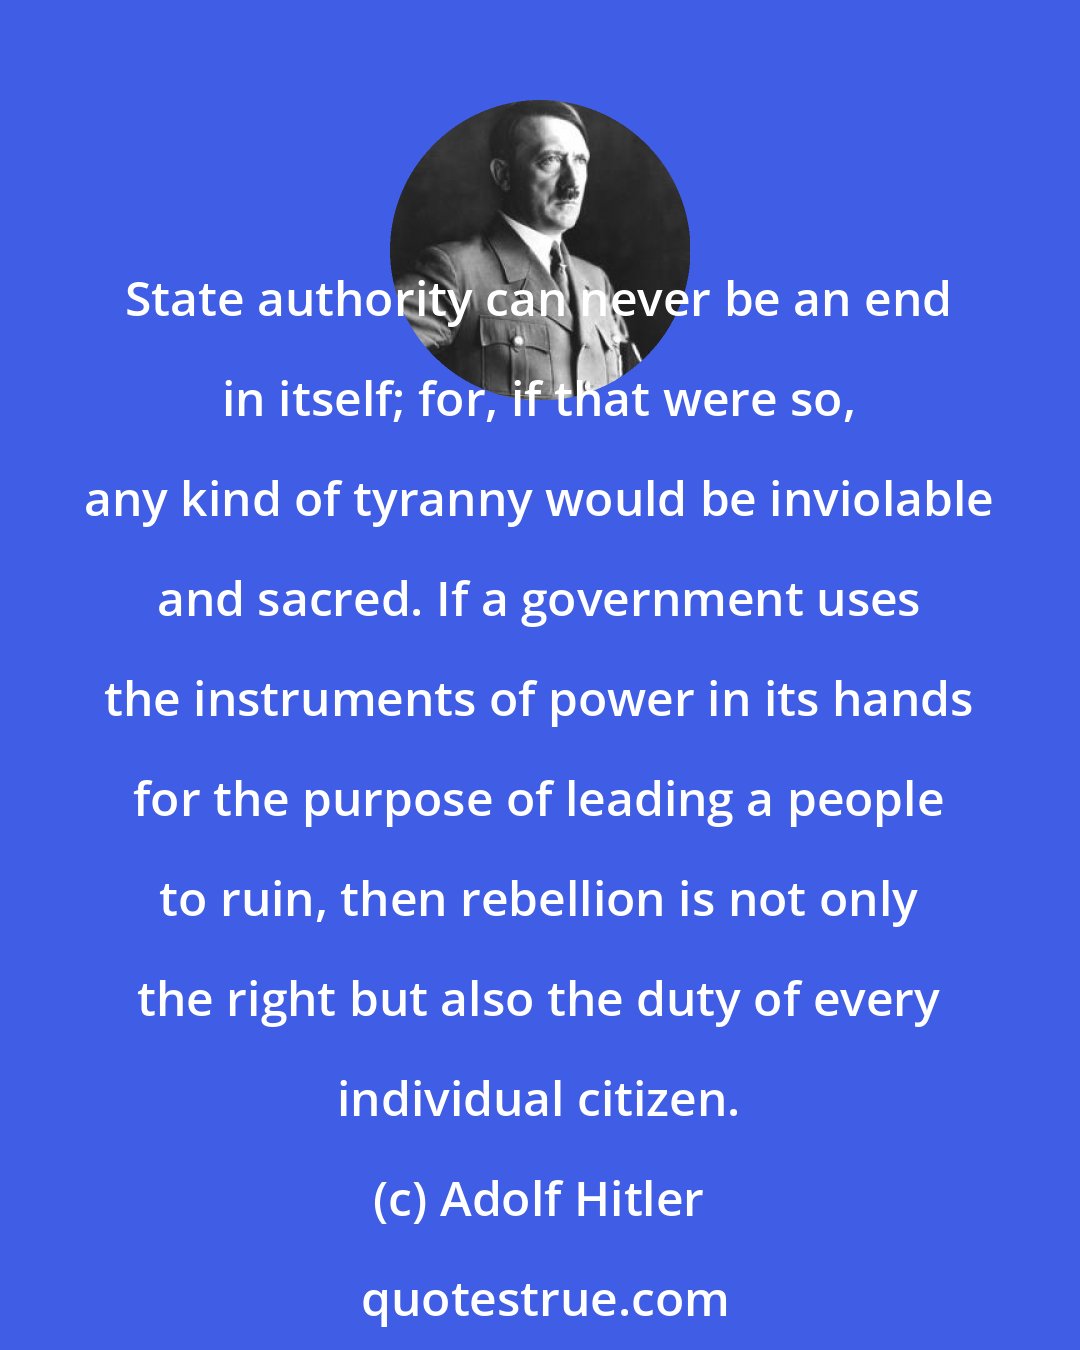 Adolf Hitler: State authority can never be an end in itself; for, if that were so, any kind of tyranny would be inviolable and sacred. If a government uses the instruments of power in its hands for the purpose of leading a people to ruin, then rebellion is not only the right but also the duty of every individual citizen.